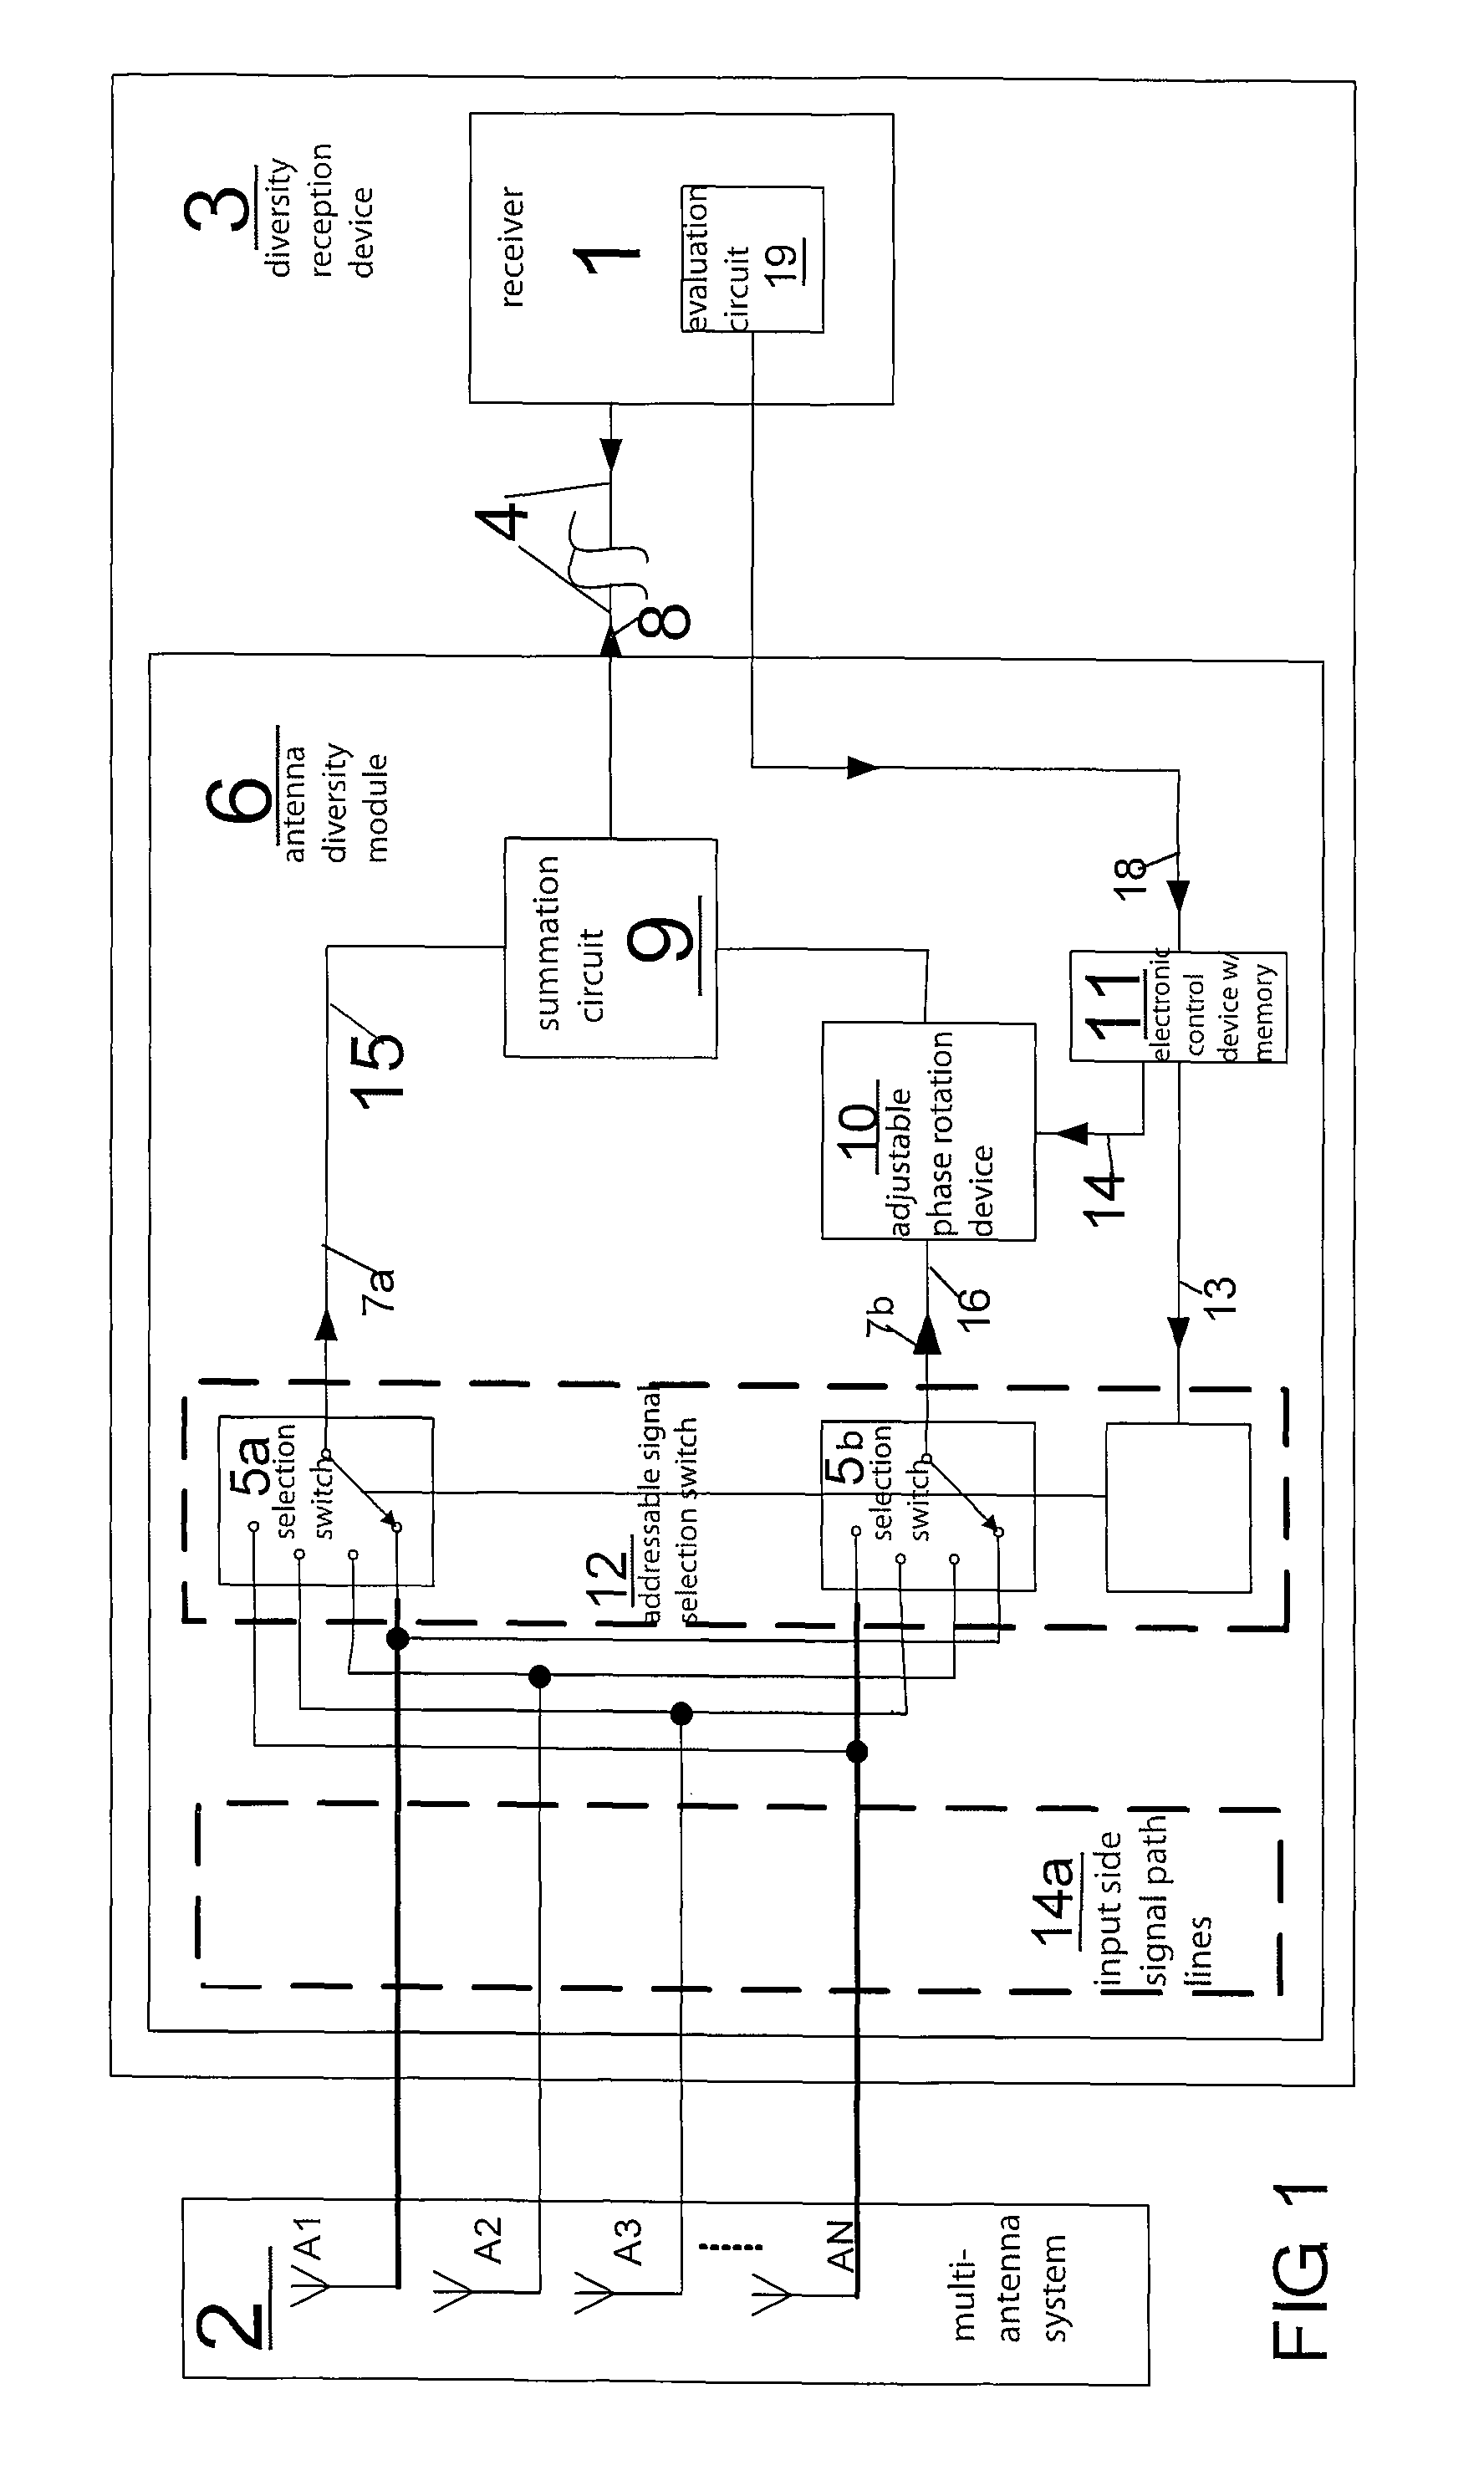 Antenna diversity system for radio reception for motor vehicles